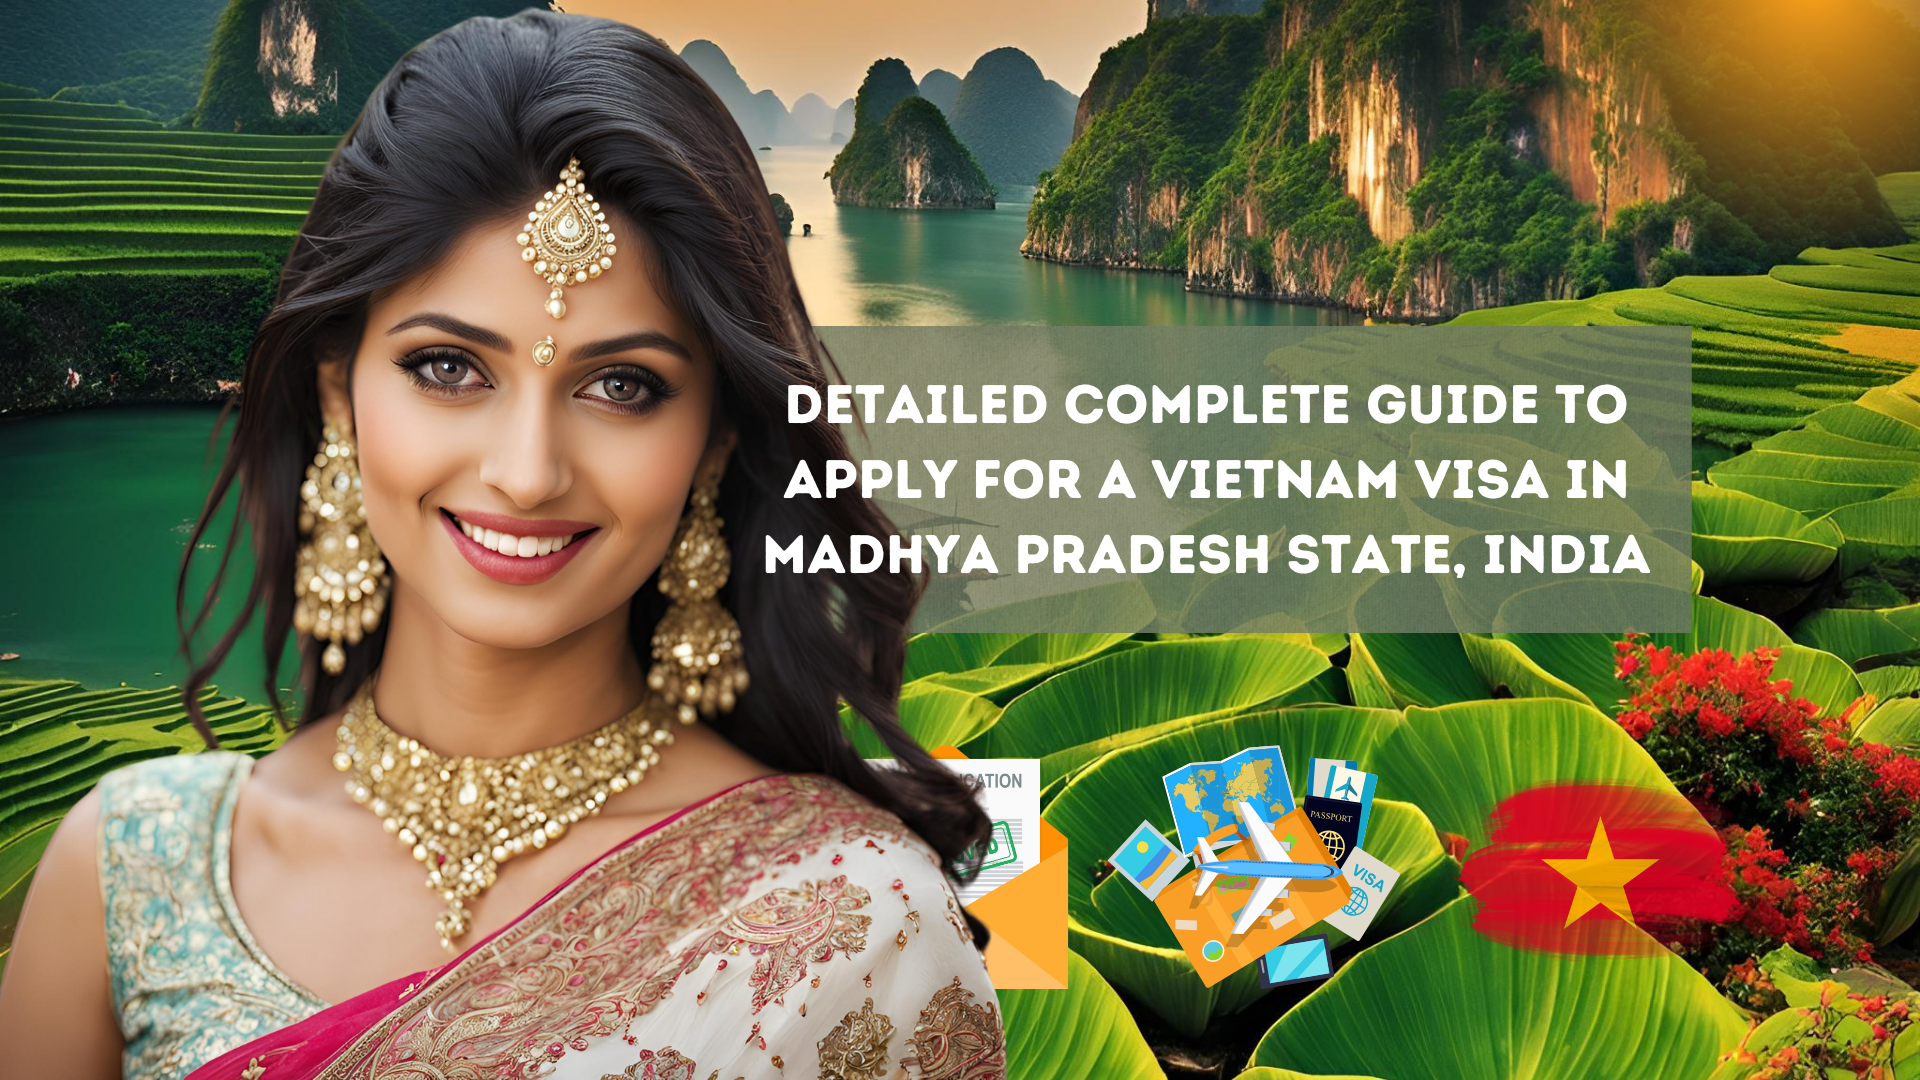 Detailed Complete Guide to Apply for a Vietnam Visa in Madhya Pradesh State, India